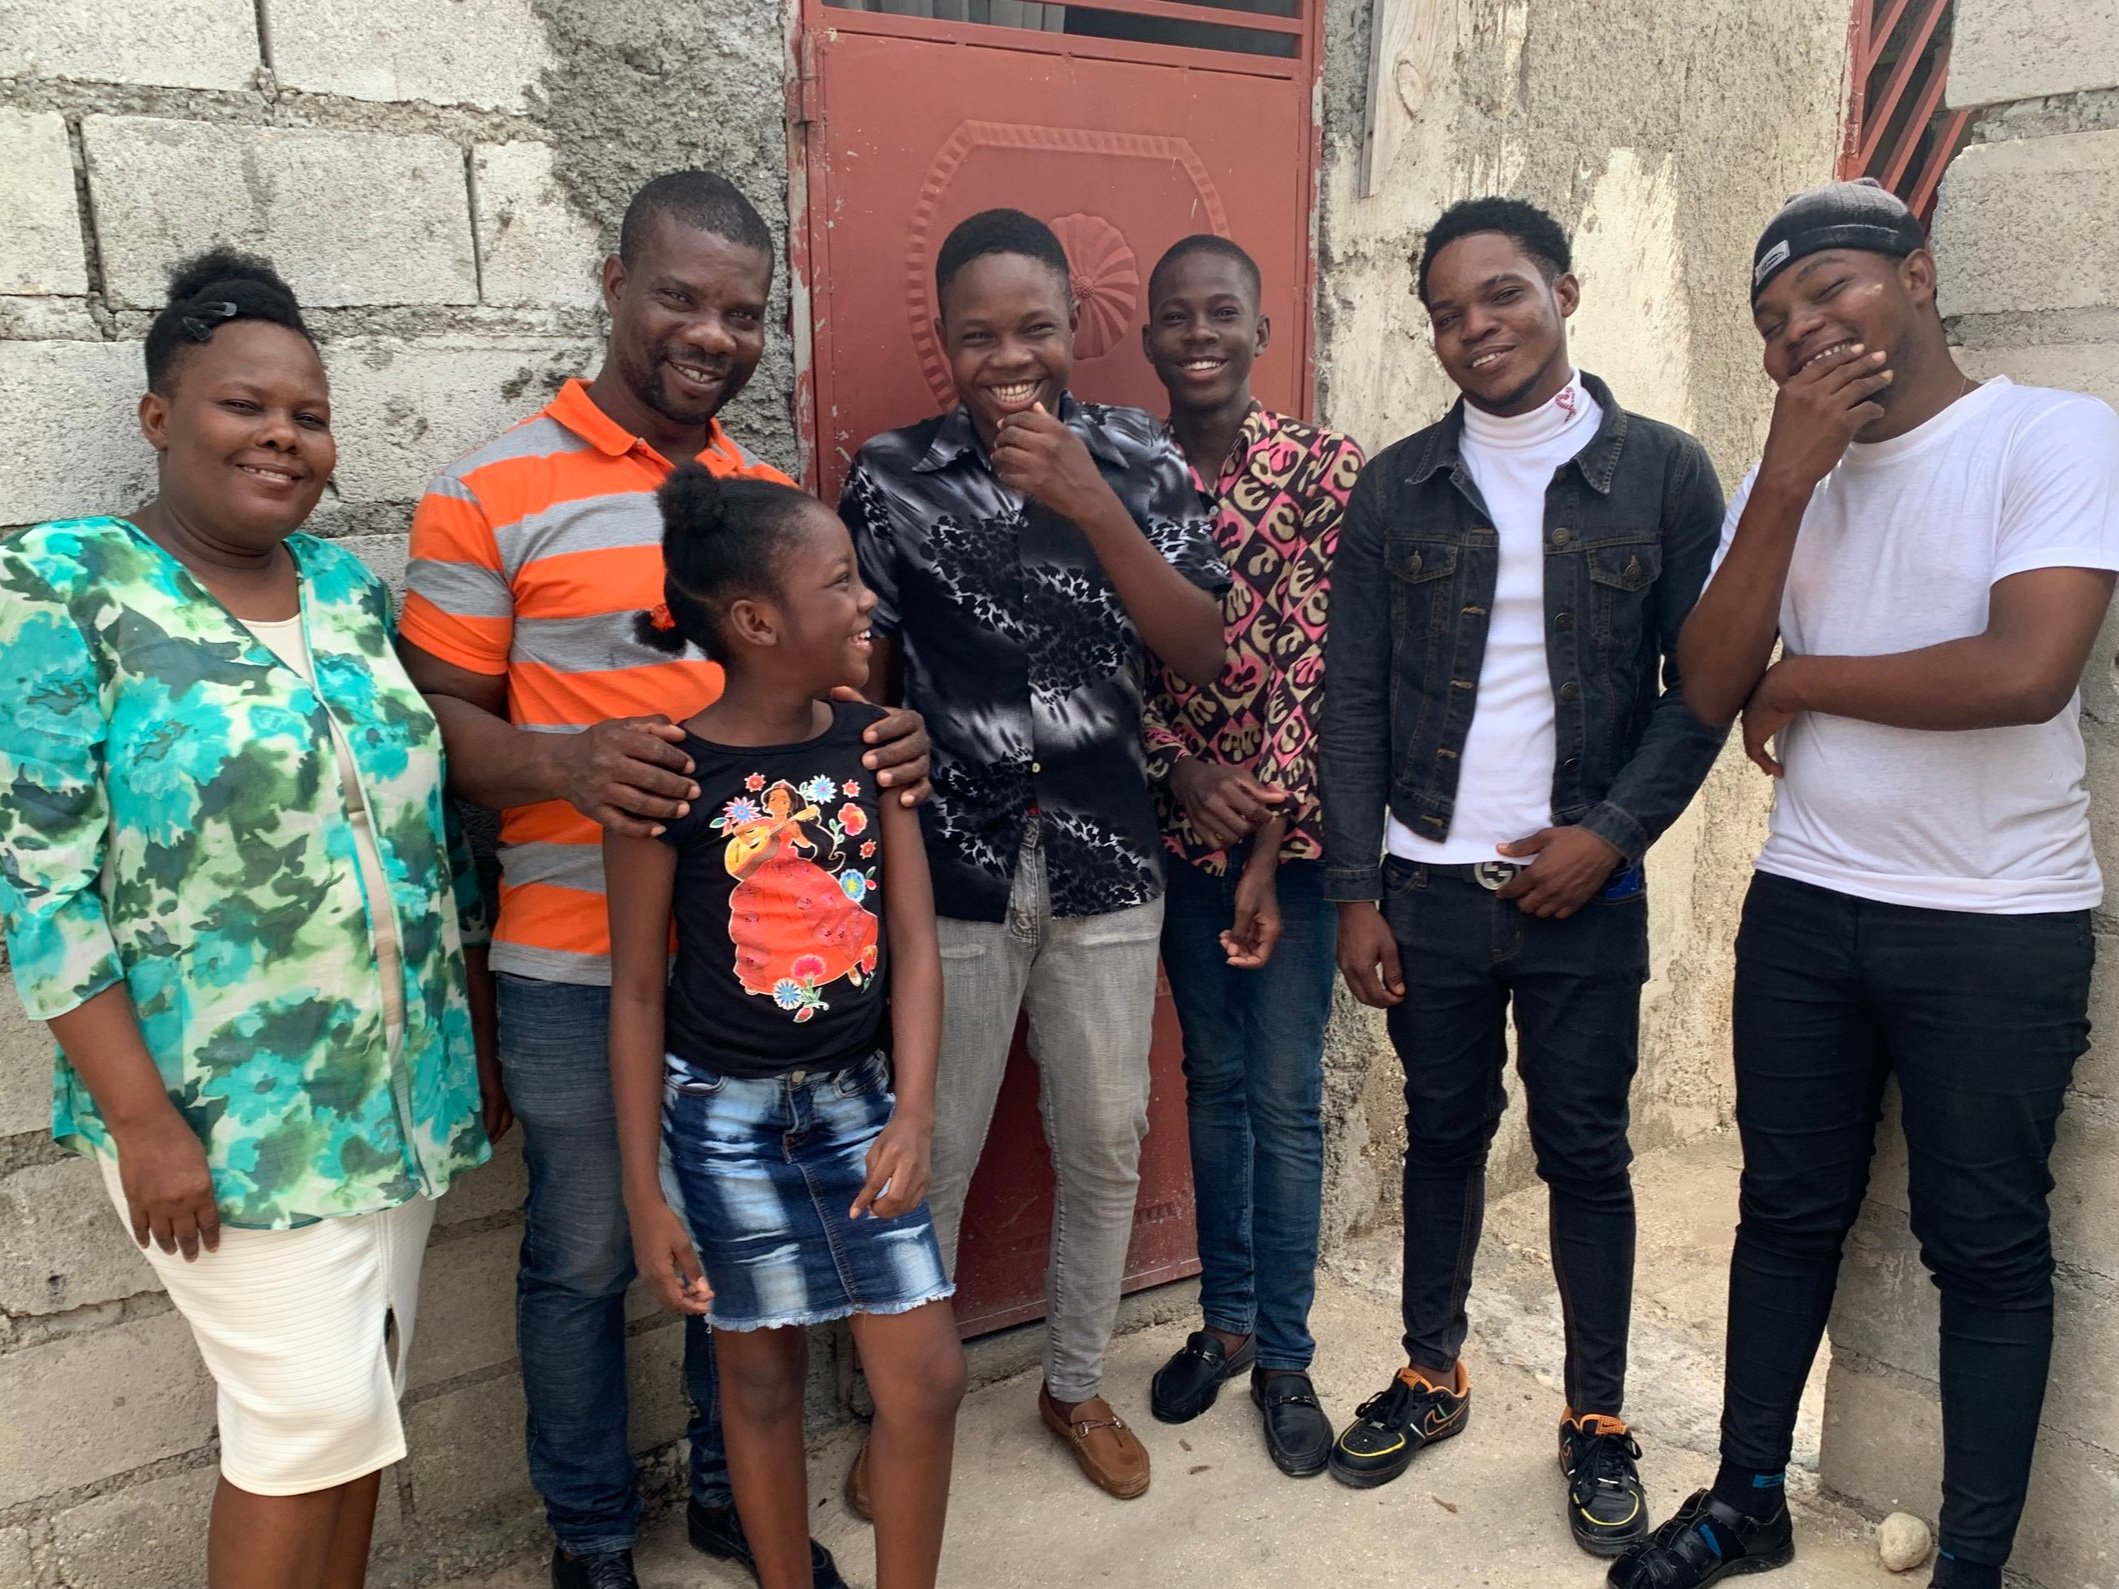  Remember Carmitha, our shero who helped us show that small business that services an immediate need in the community can thrive? Here she is with her beautiful family. Her two oldest boys are in college, with her third boy preparing to graduate high